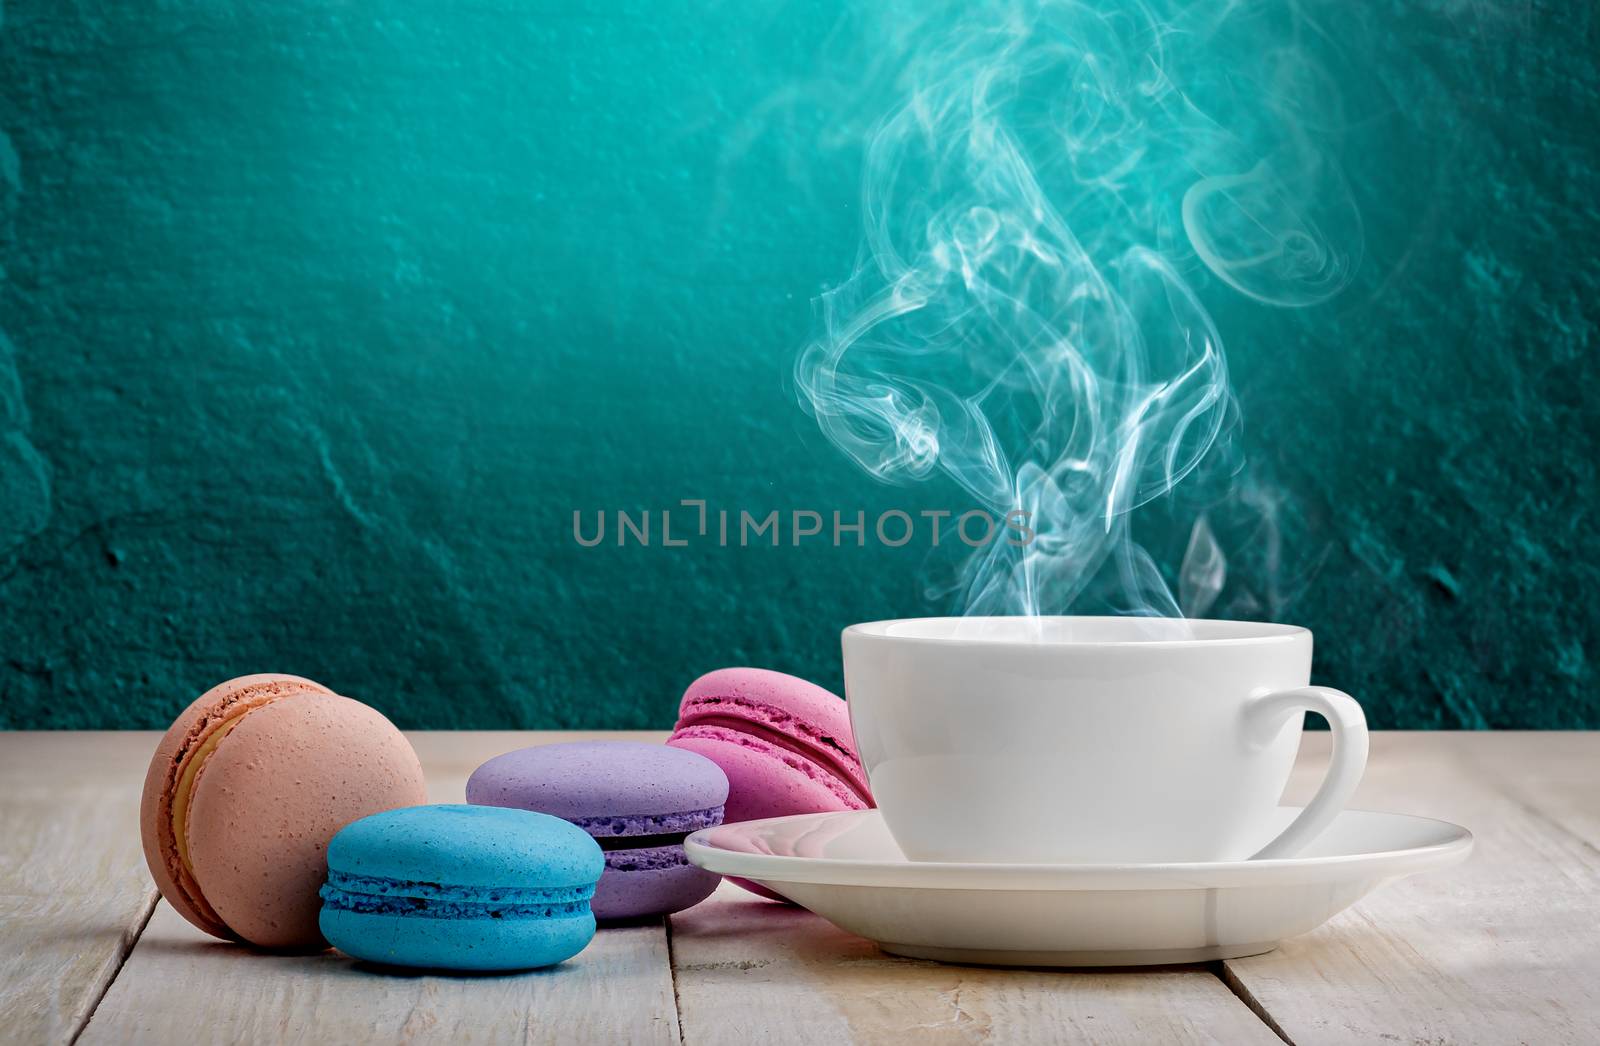 Macaroons with coffee on wooden table with background. Turquoise background